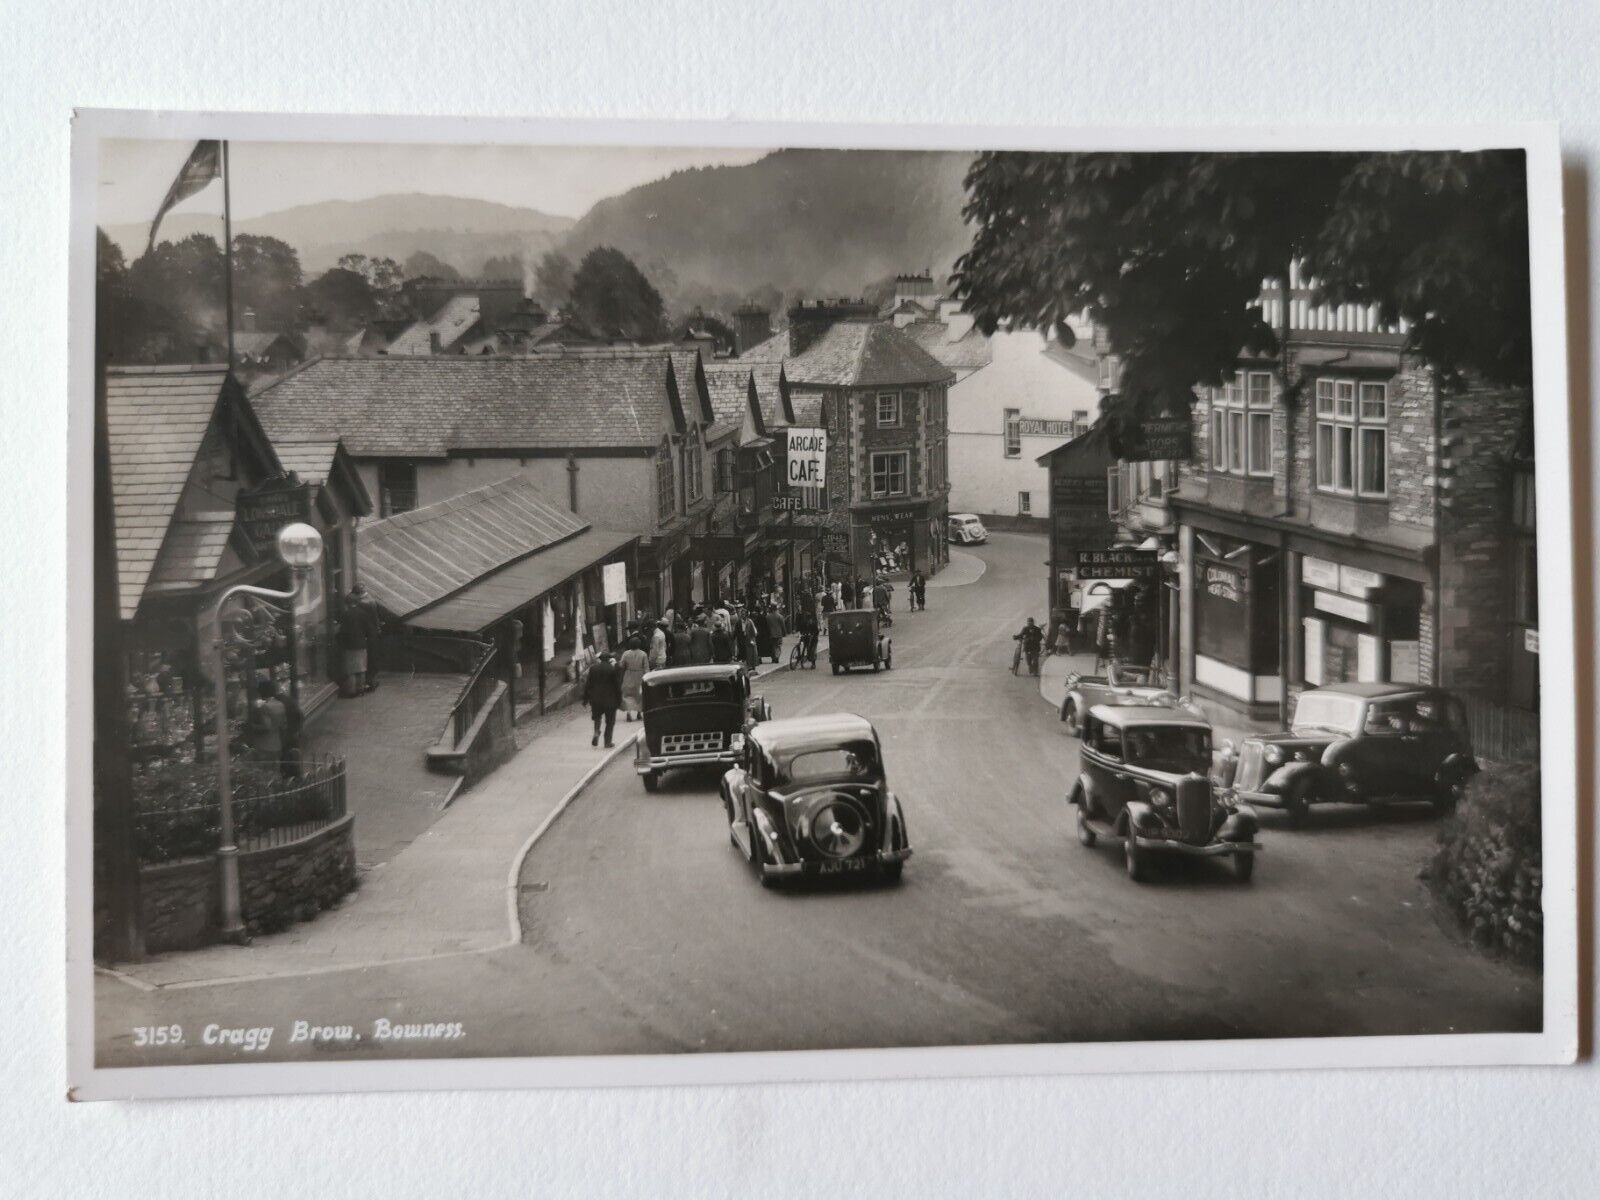 House Clearance - Vintage Real Photo Service - Cragg Brow. Bowness - Cumbria. Old cars